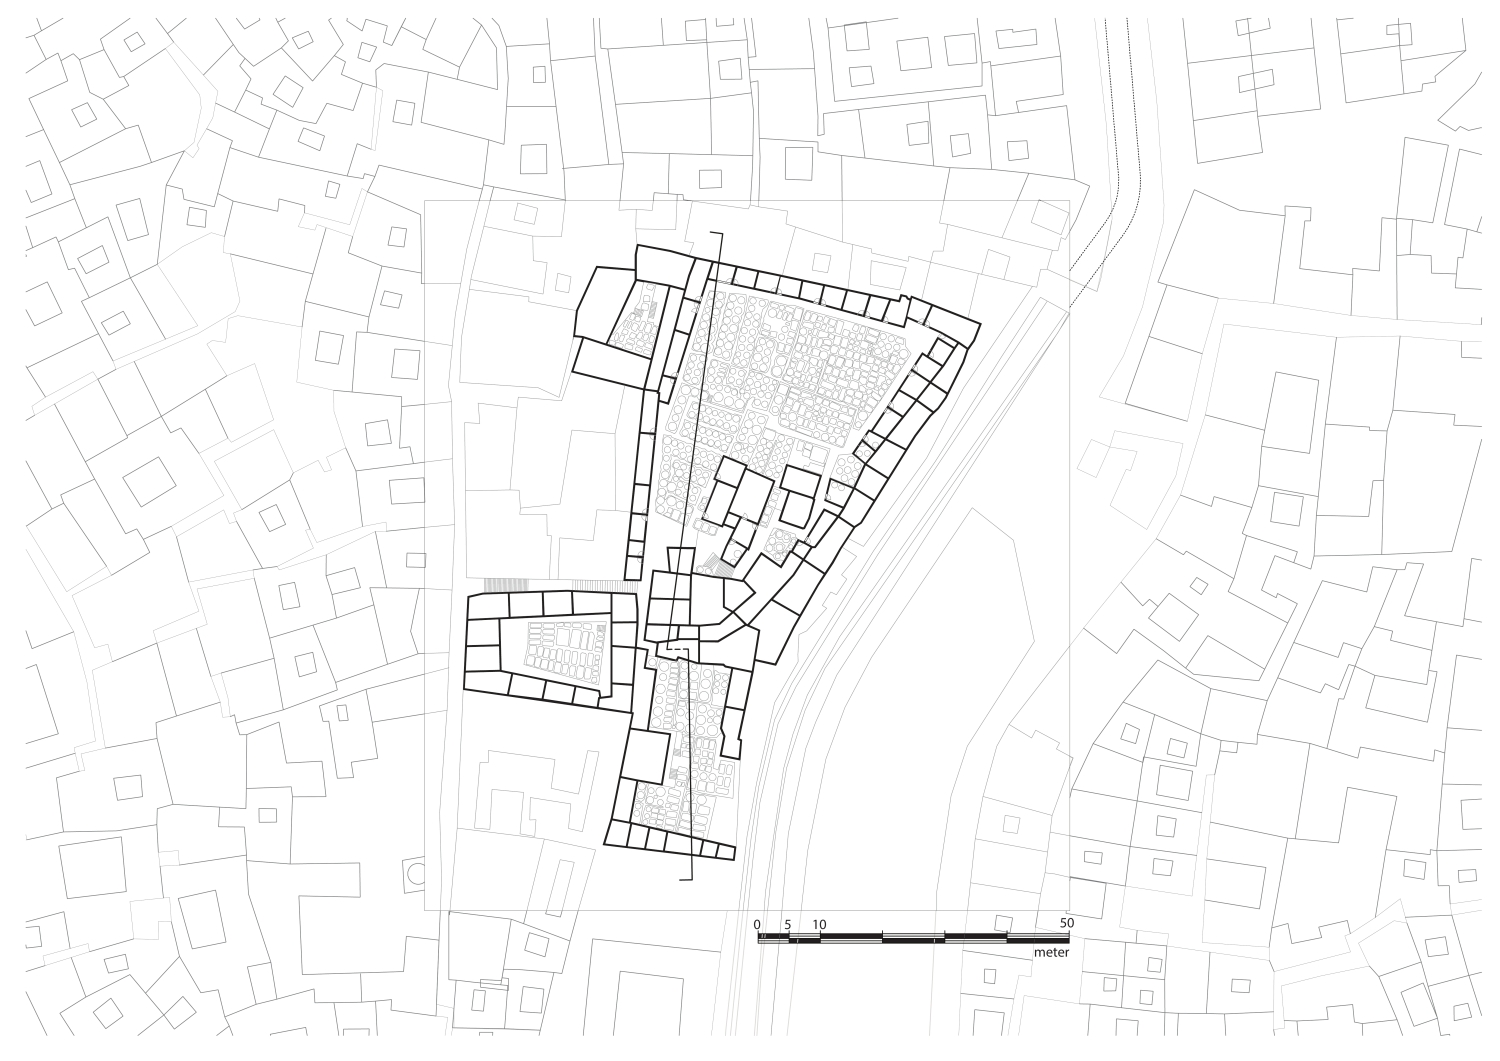 Plan of the tannery